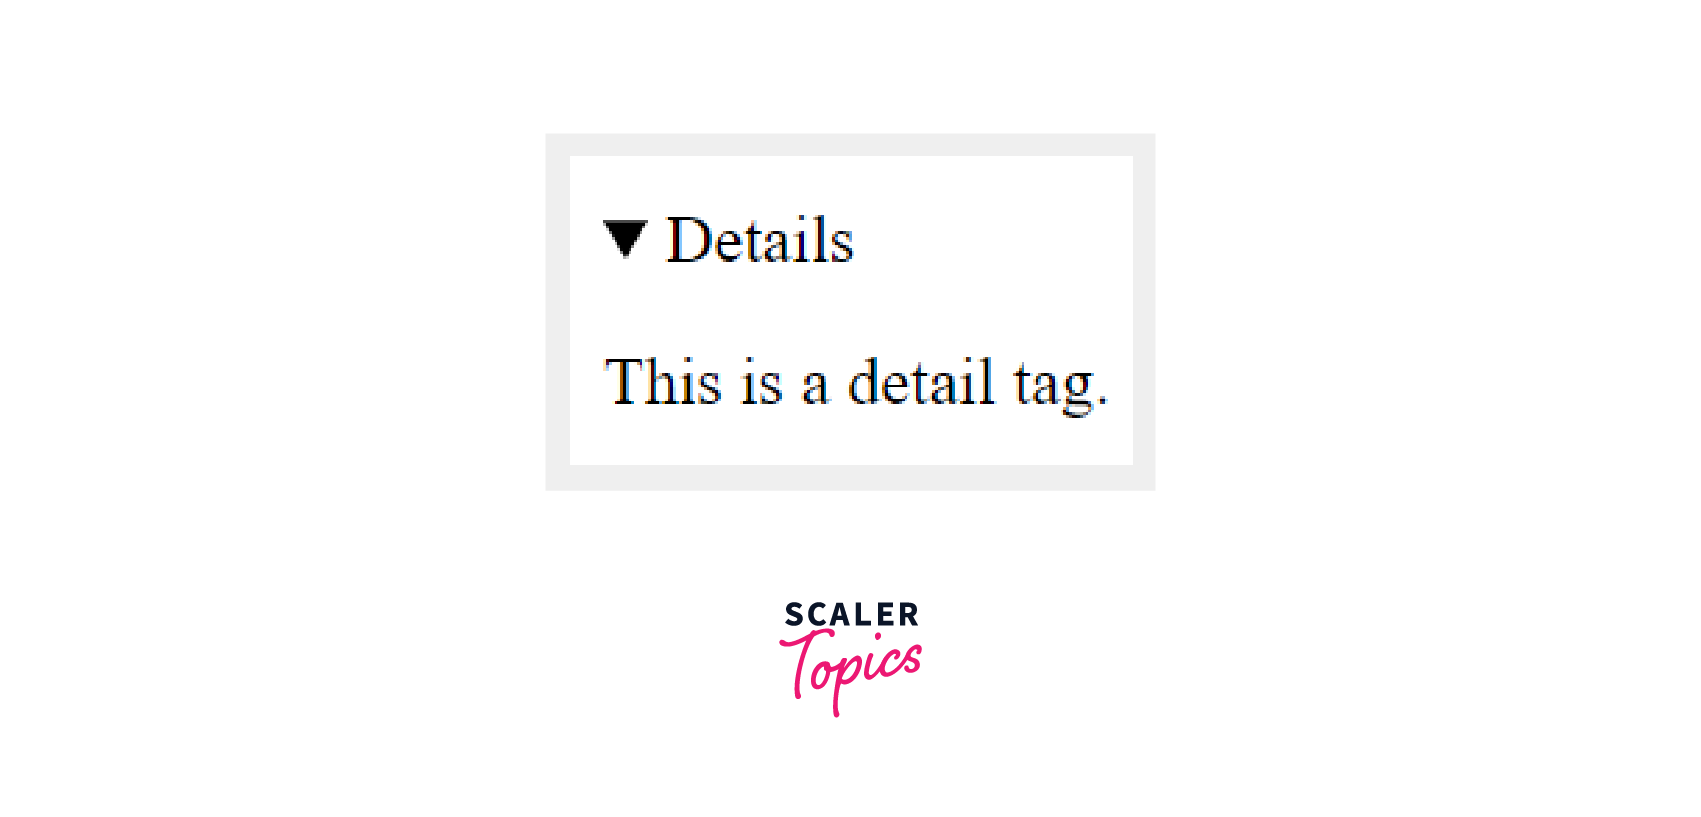 output of the details tag after clicking